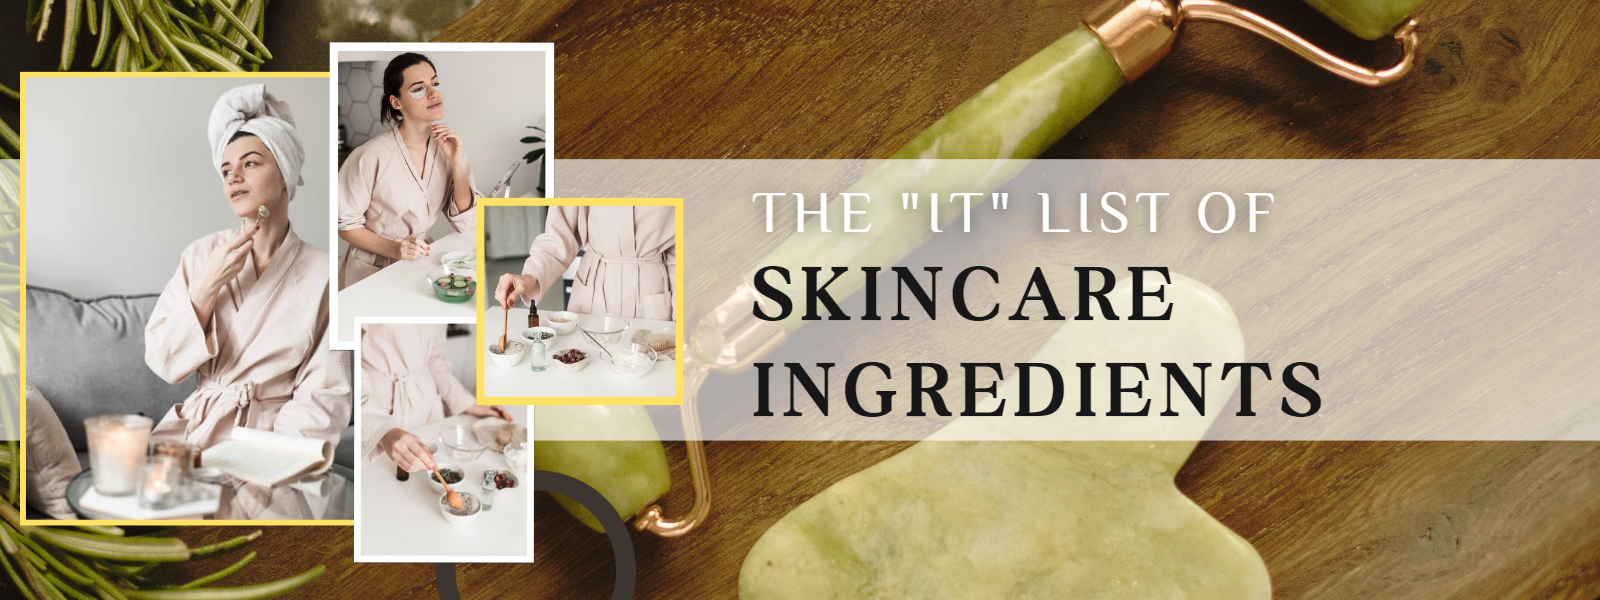 The “IT” list of SKINCARE INGREDIENTS